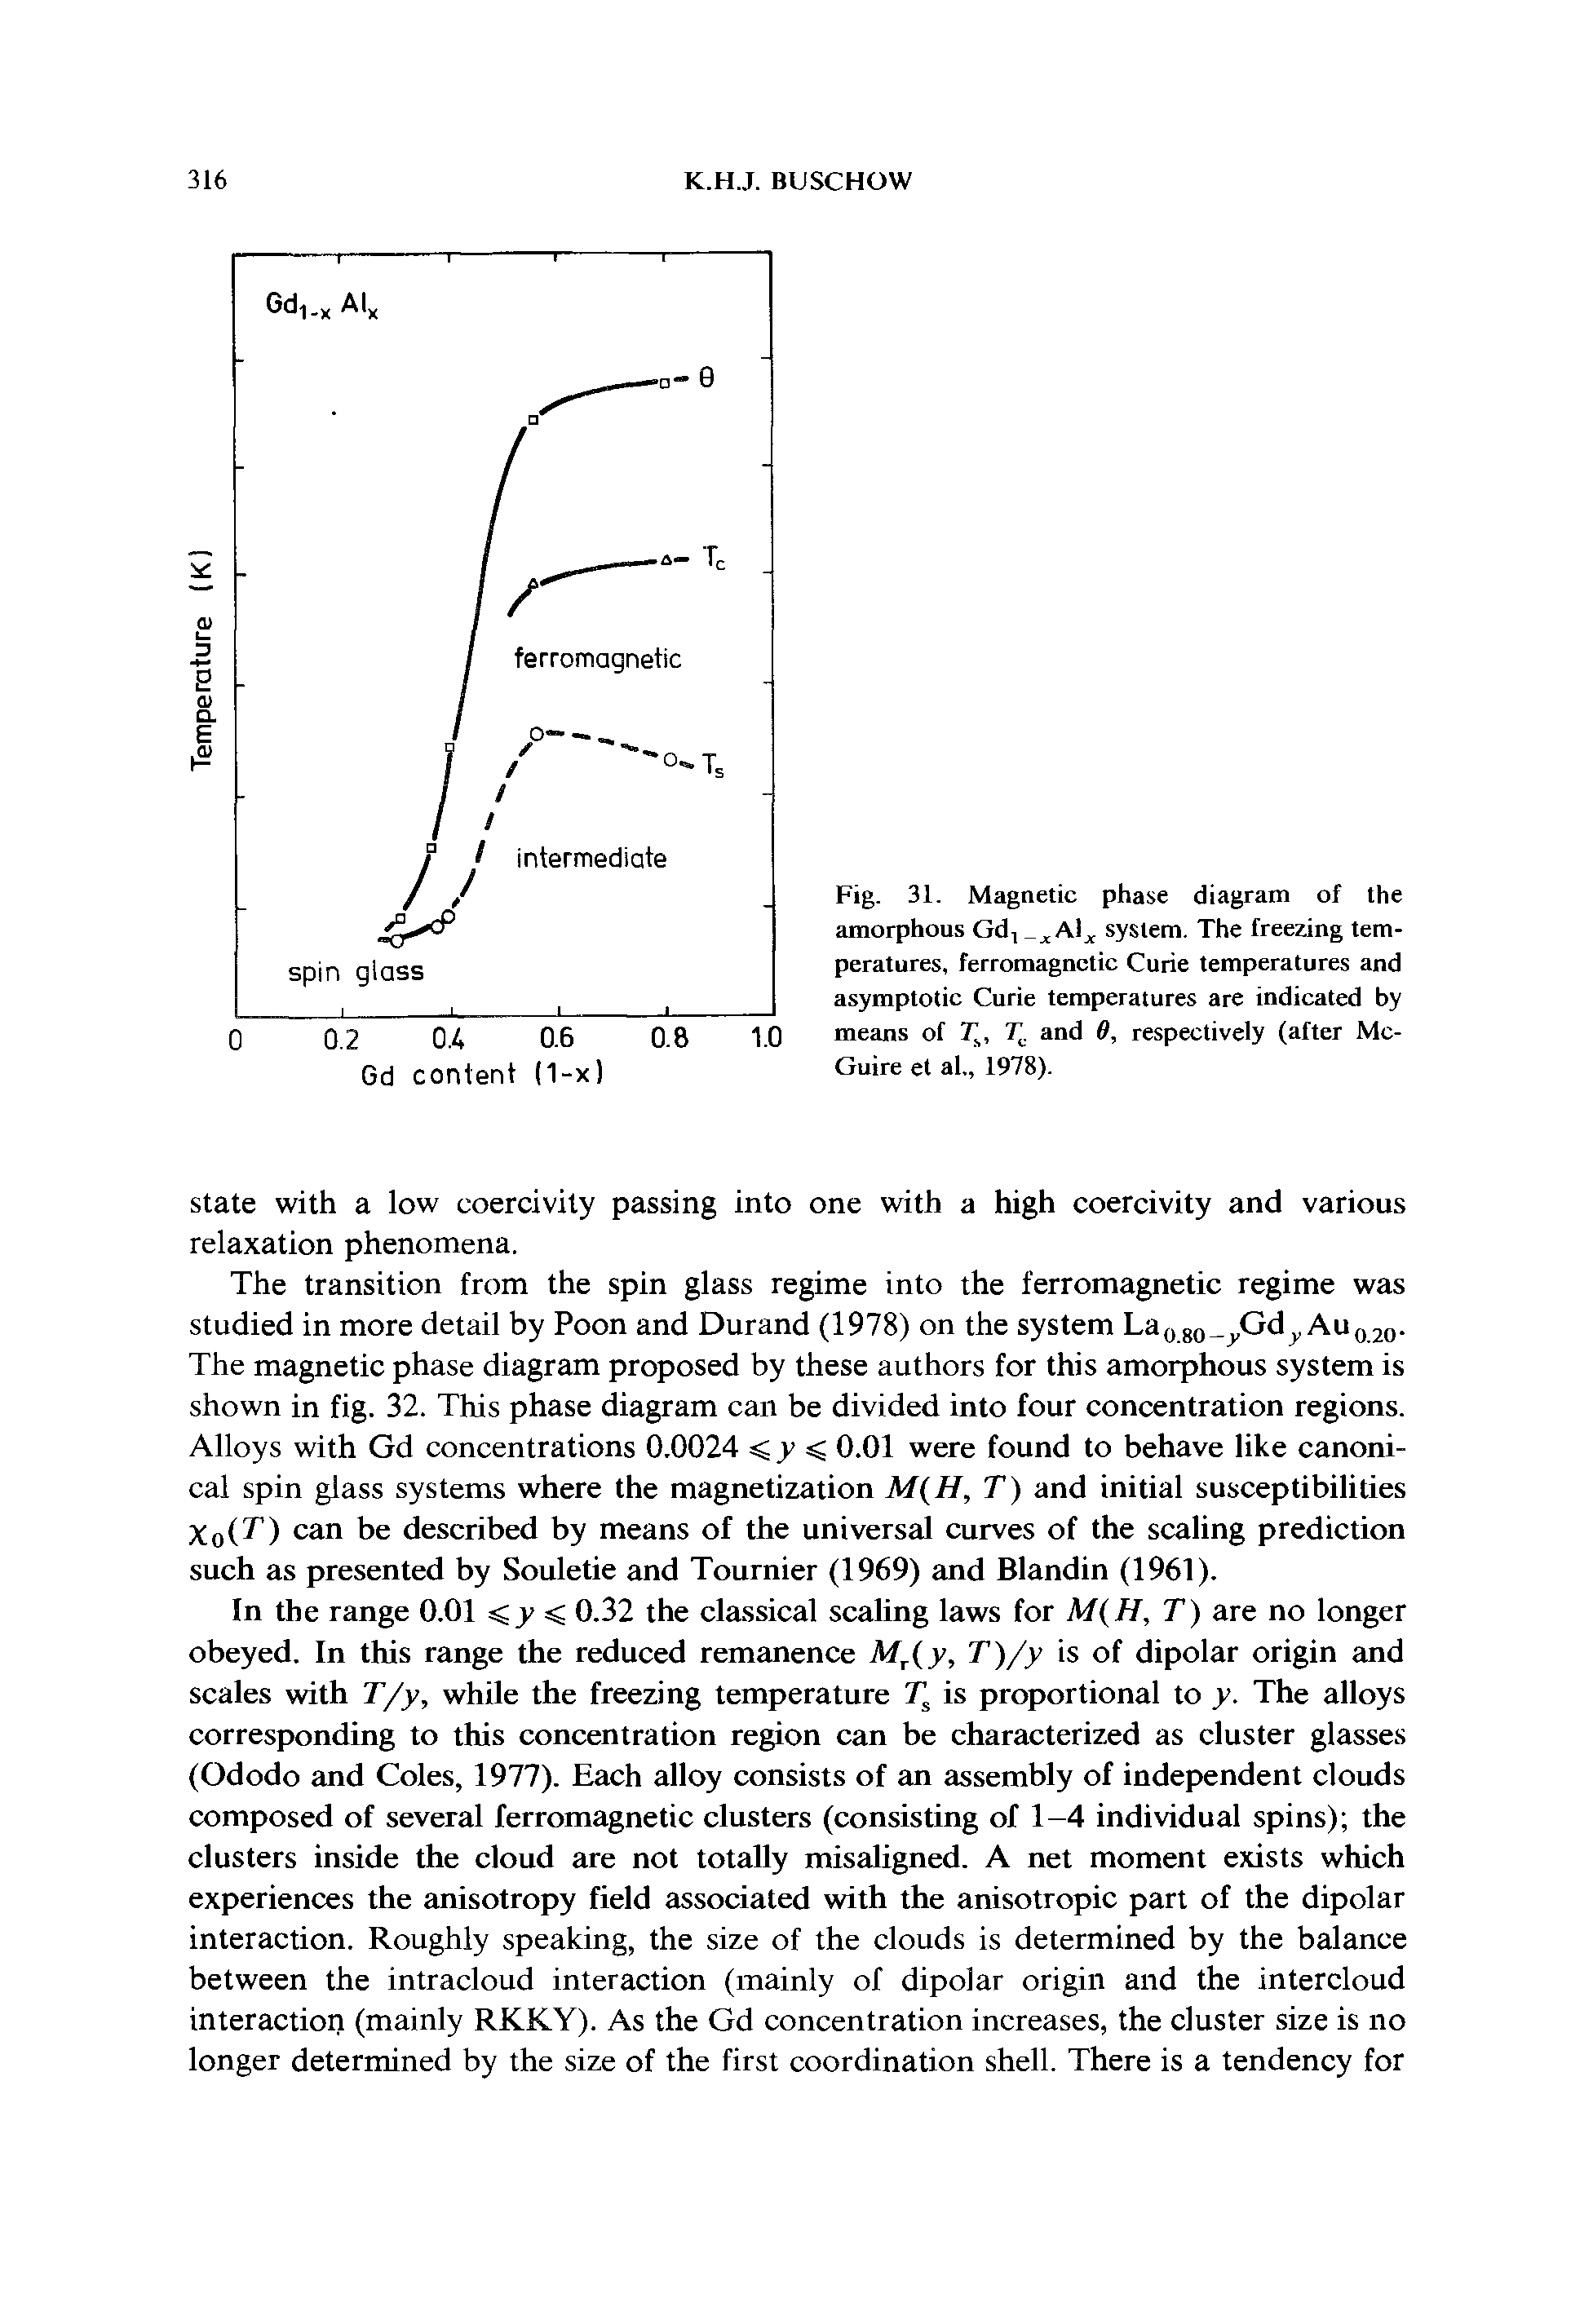 Fig. 31. Magnetic phase diagram of the amorphous Gd, Al system. The freezing temperatures, ferromagnetic Curie temperatures and asymptotic Curie temperatures are indicated by means of 7, 7 and 0, respectively (after McGuire et al., 1978).